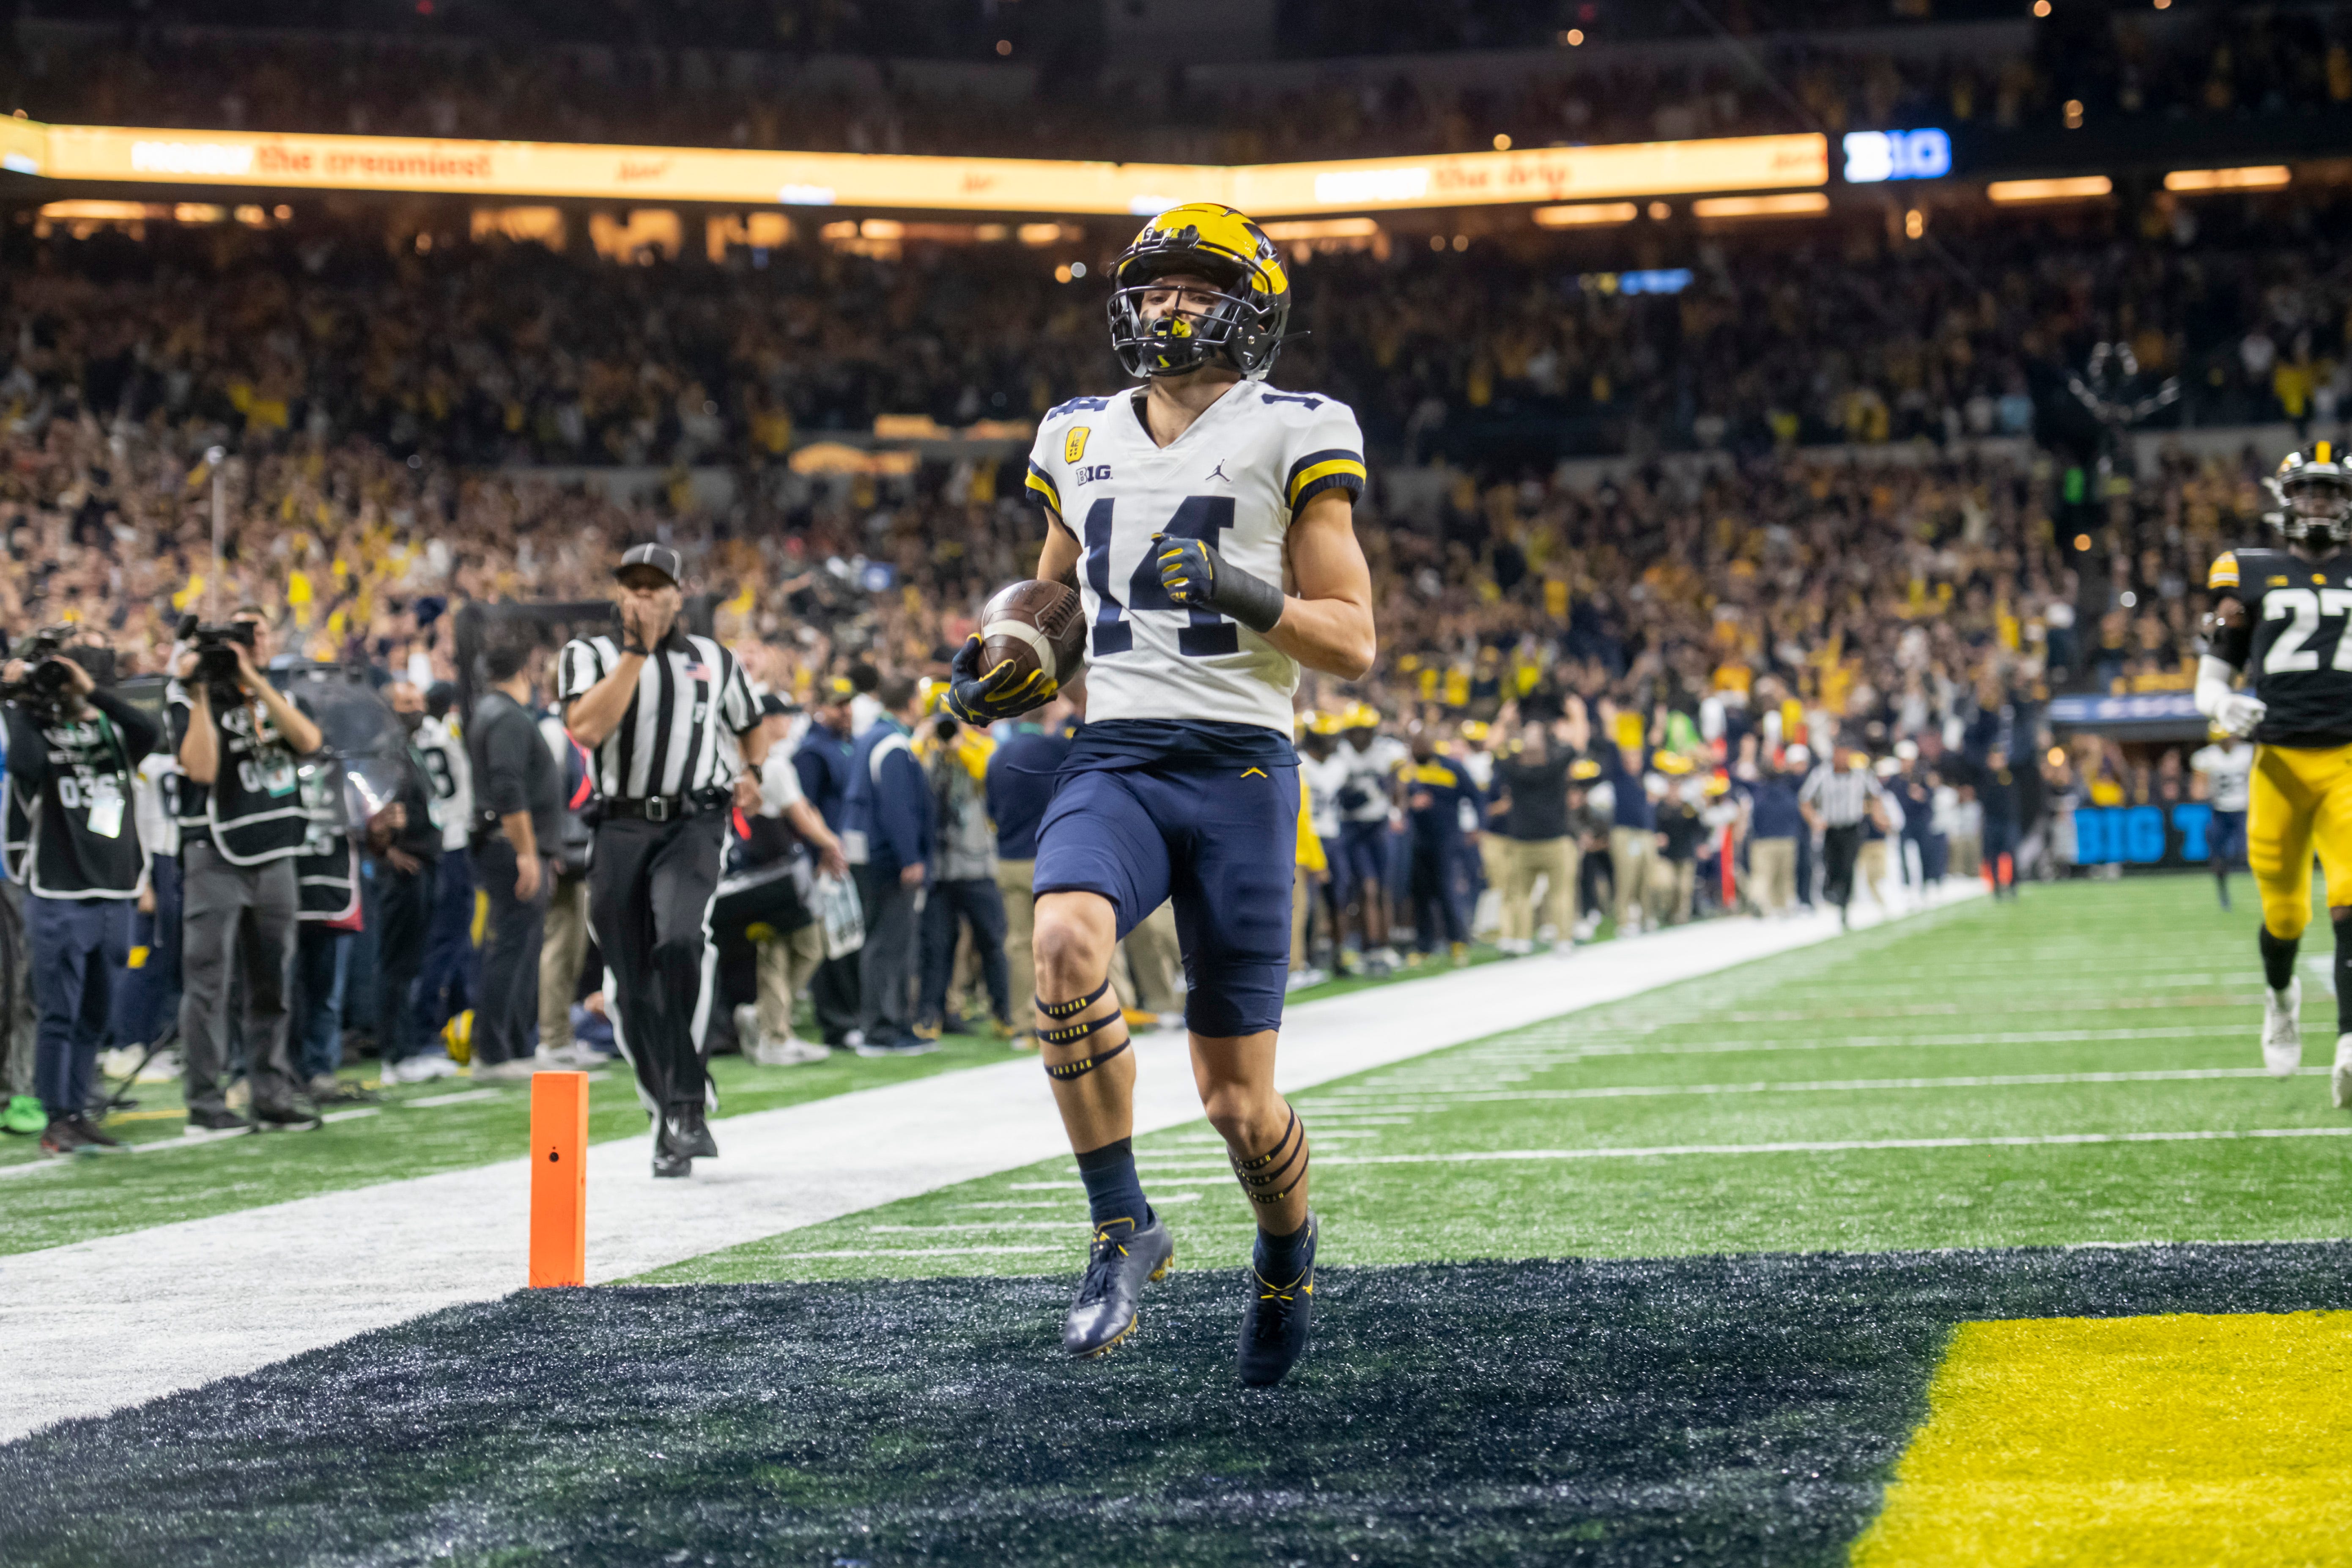 Michigan wide receiver Roman Wilson celebrates after catching a pass for a touchdown during the first quarter.